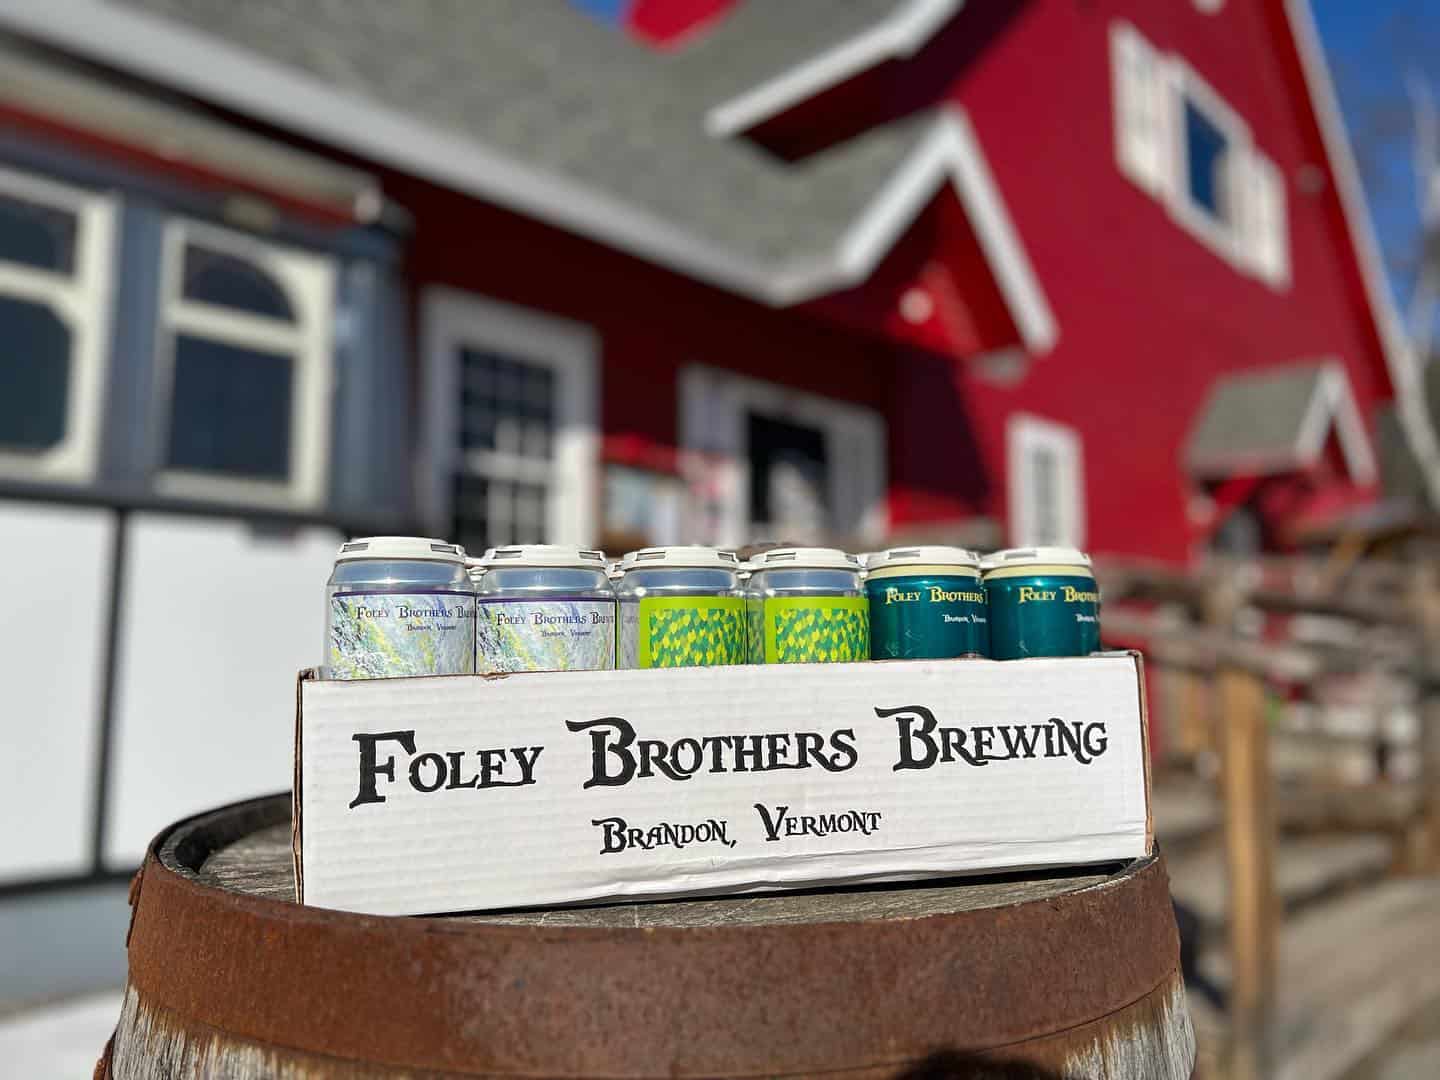 Foley Brothers Brewing - Box of Cans Outside